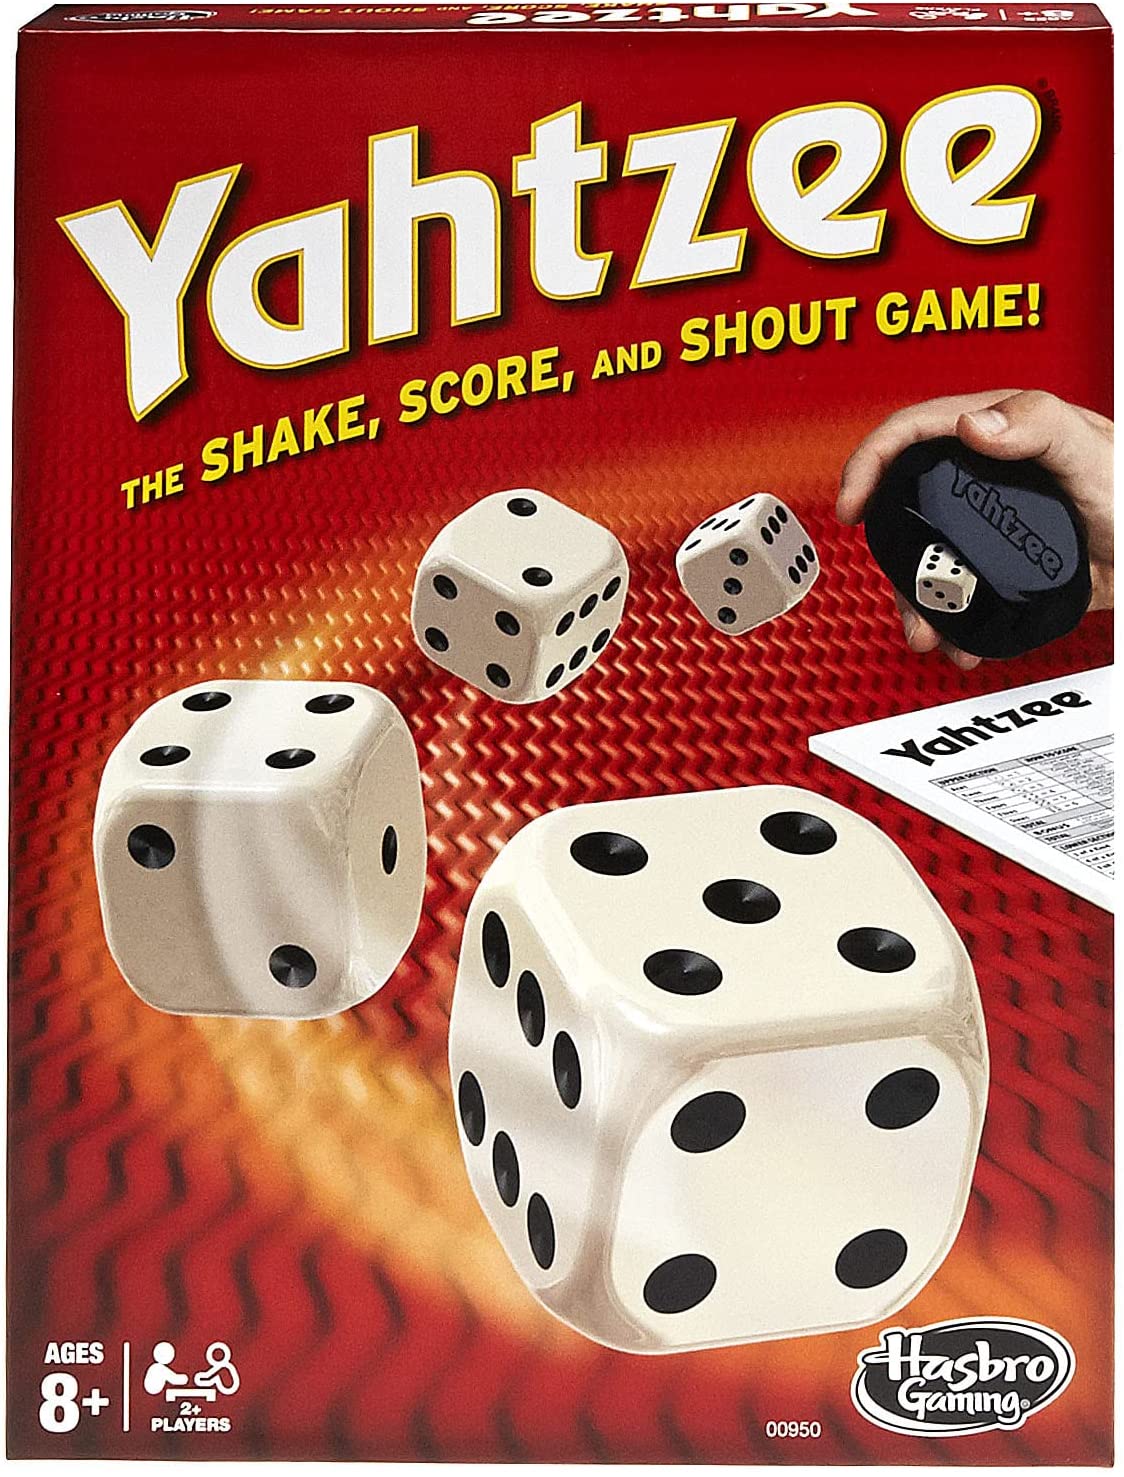 Yahtzee, for 2 Players - The Shake, Score, and Shout Game!